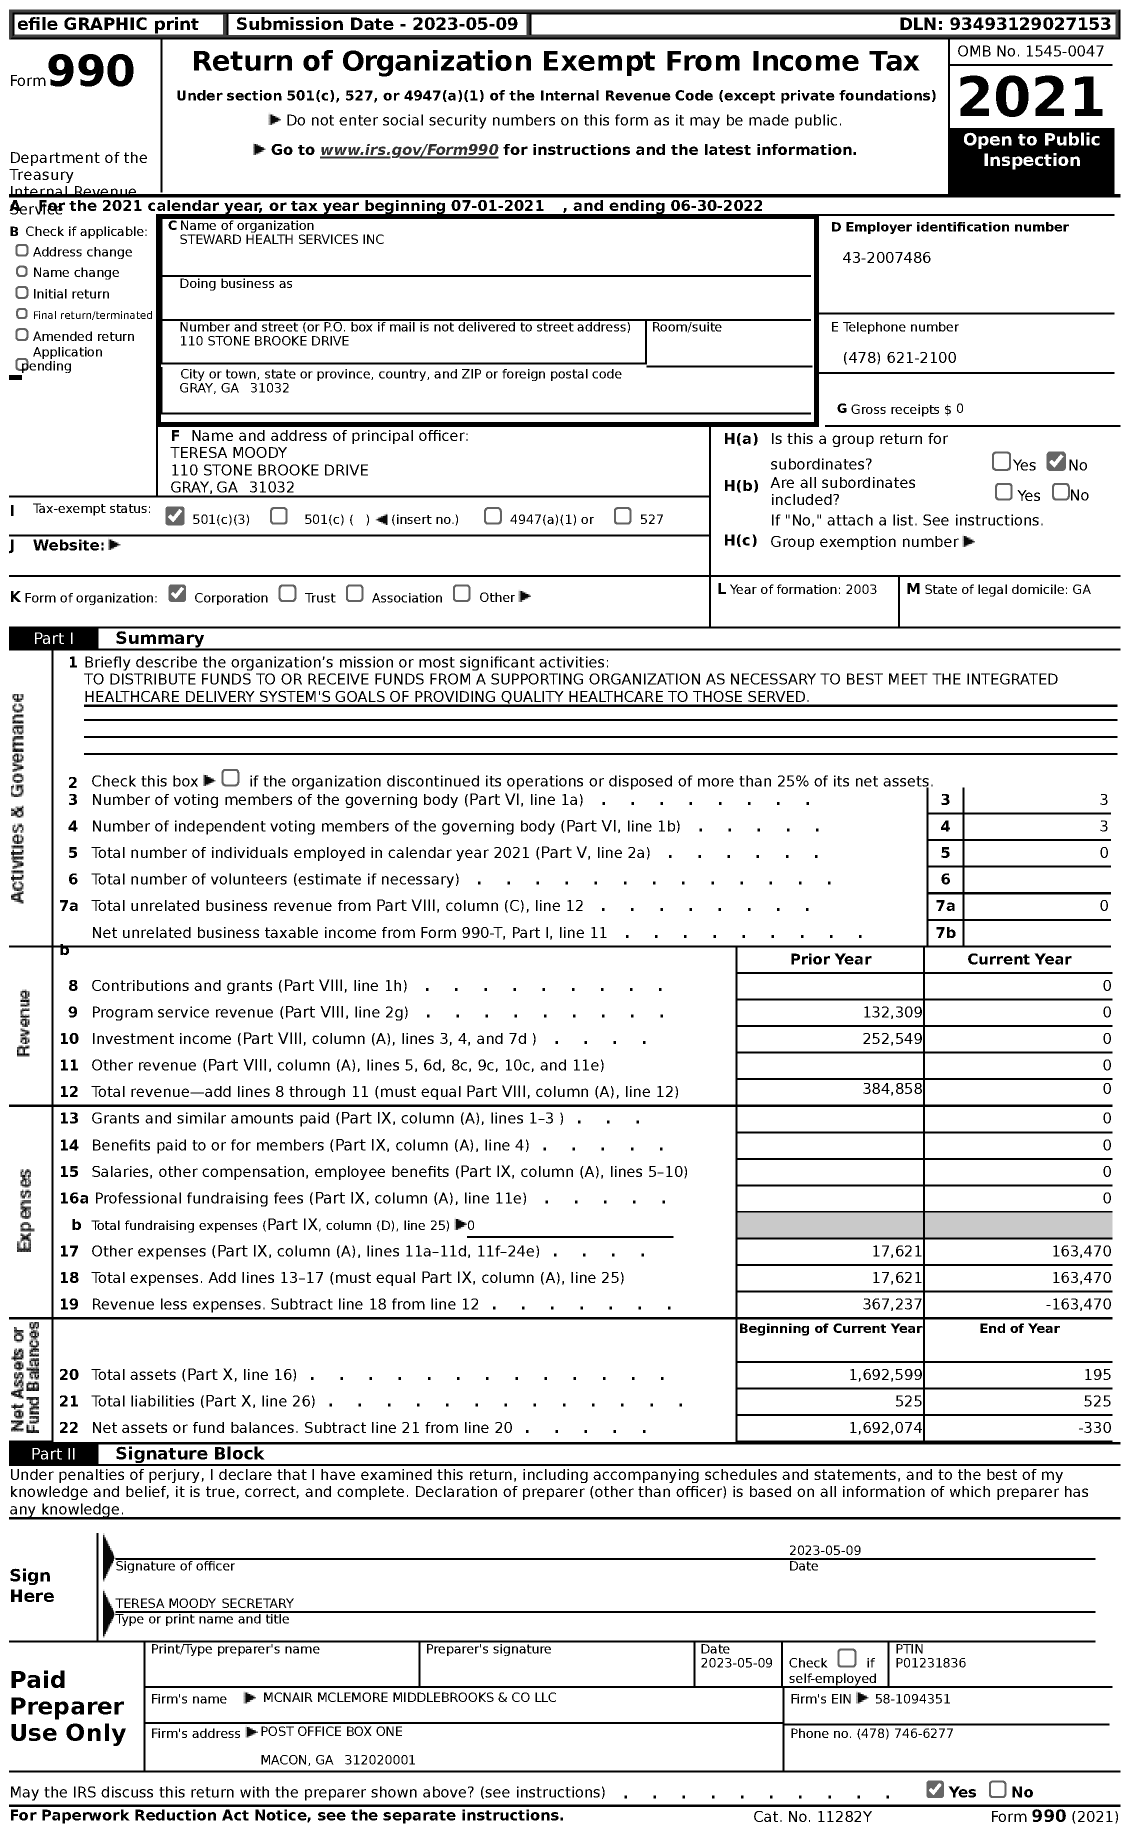 Image of first page of 2021 Form 990 for Steward Health Services